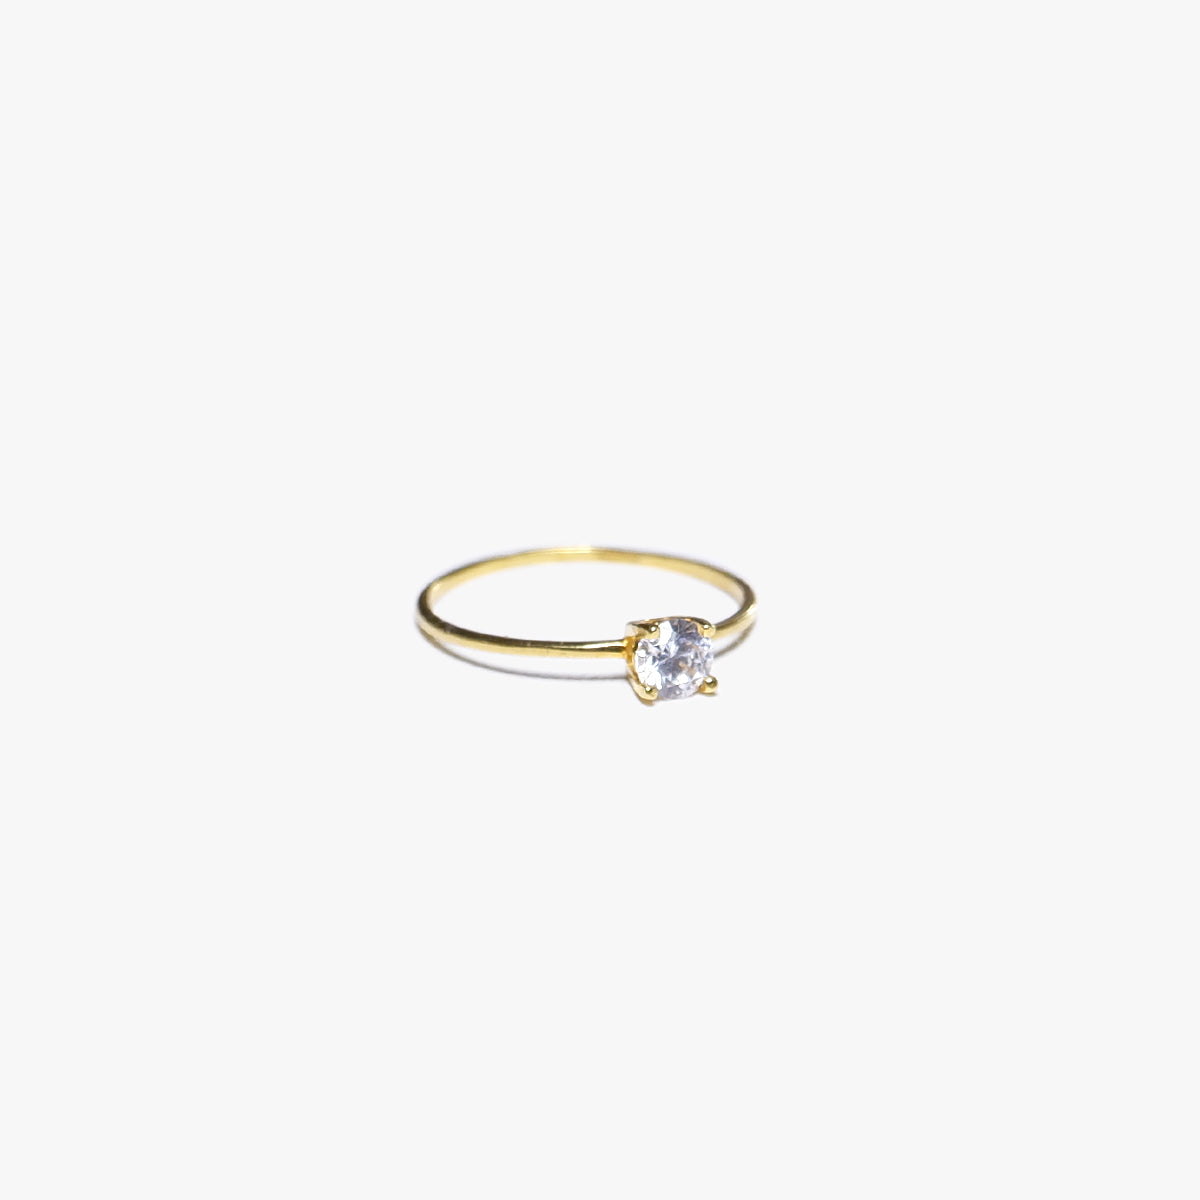 The Slim Elite Ring in Solid Gold